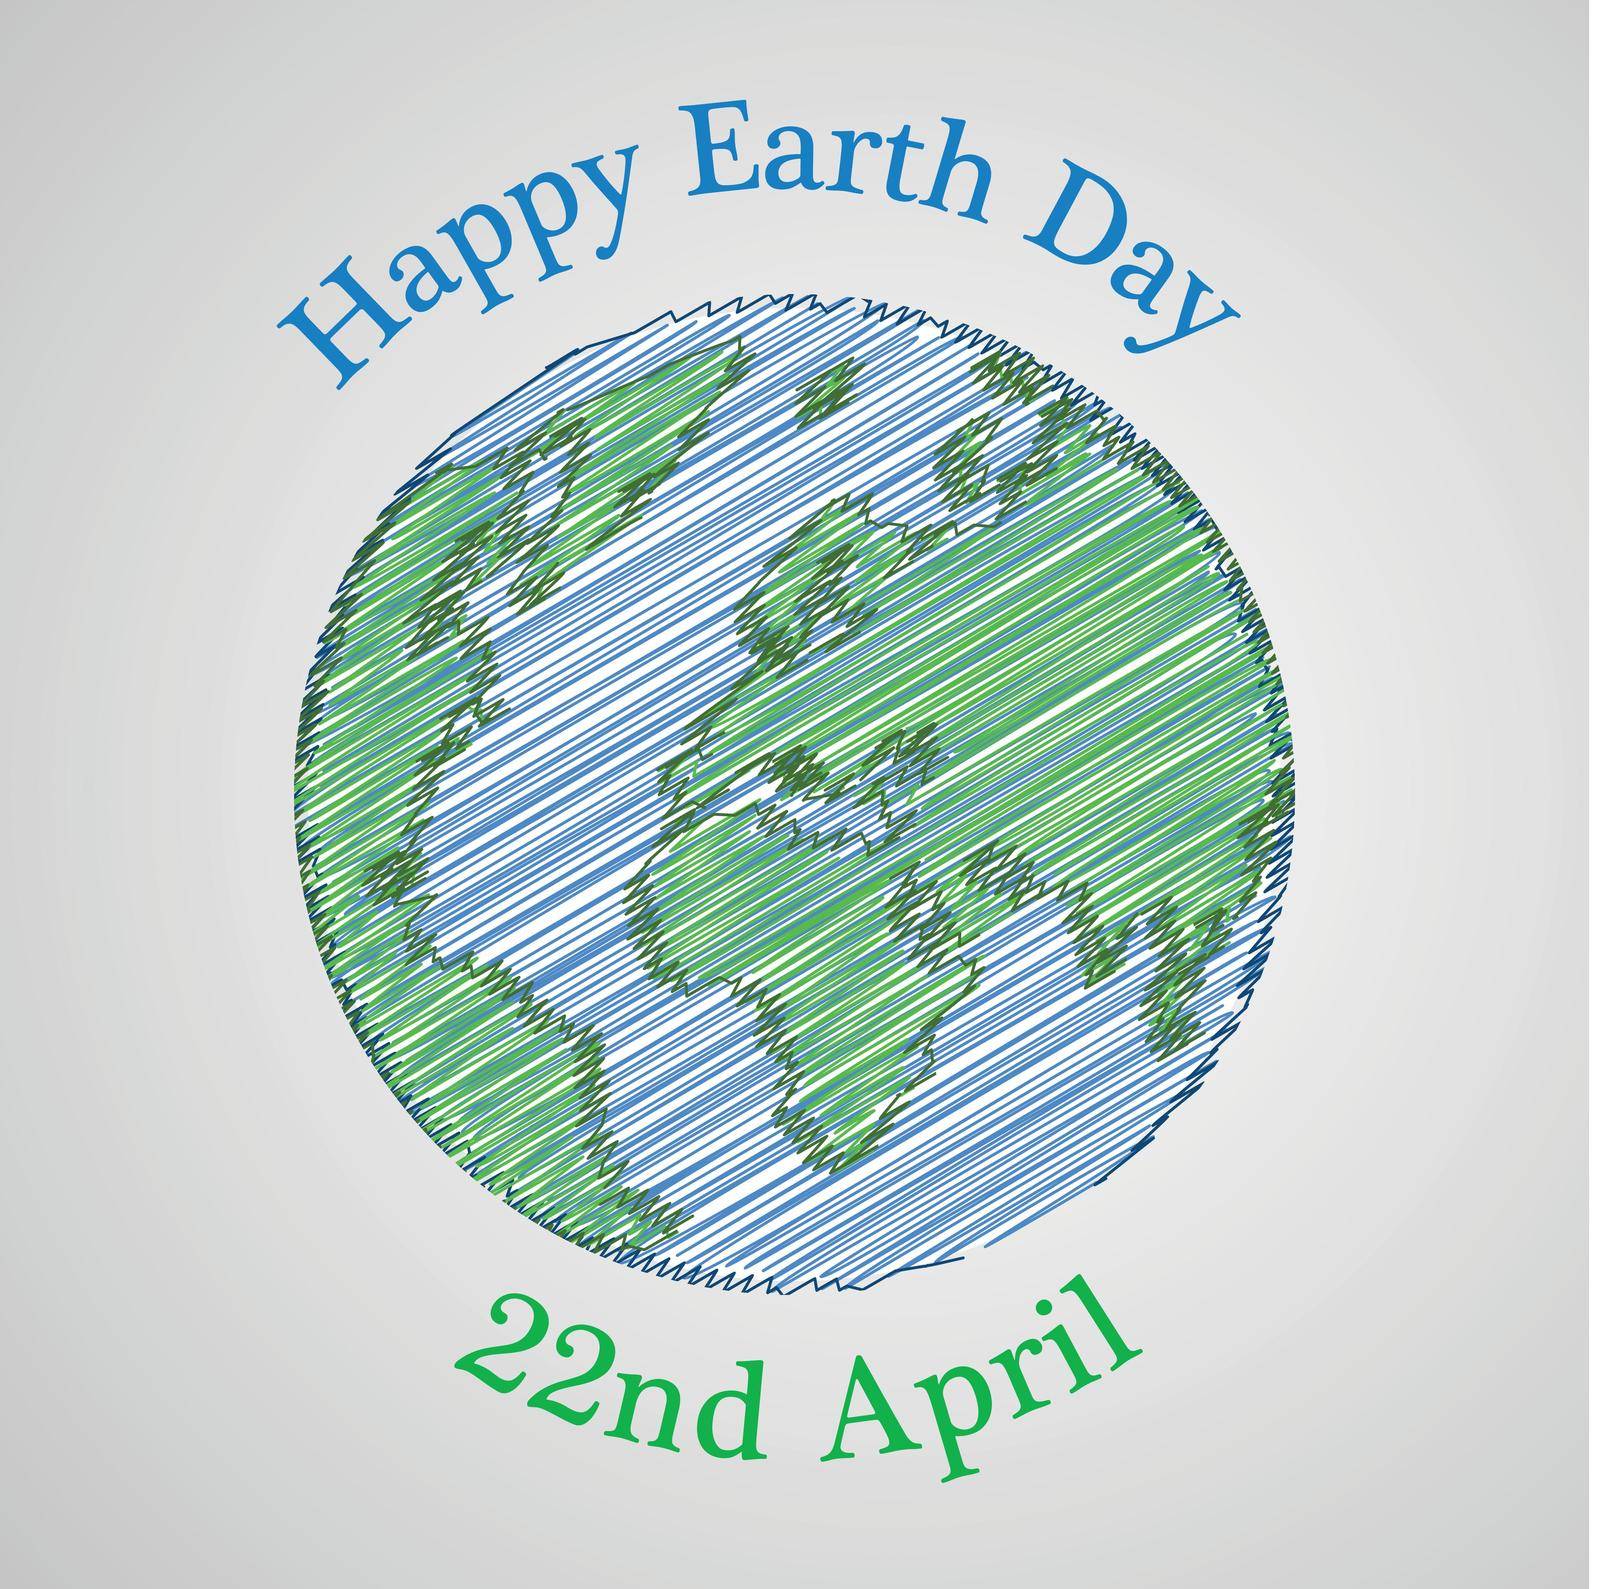 illustration of elements of Earth Day Background